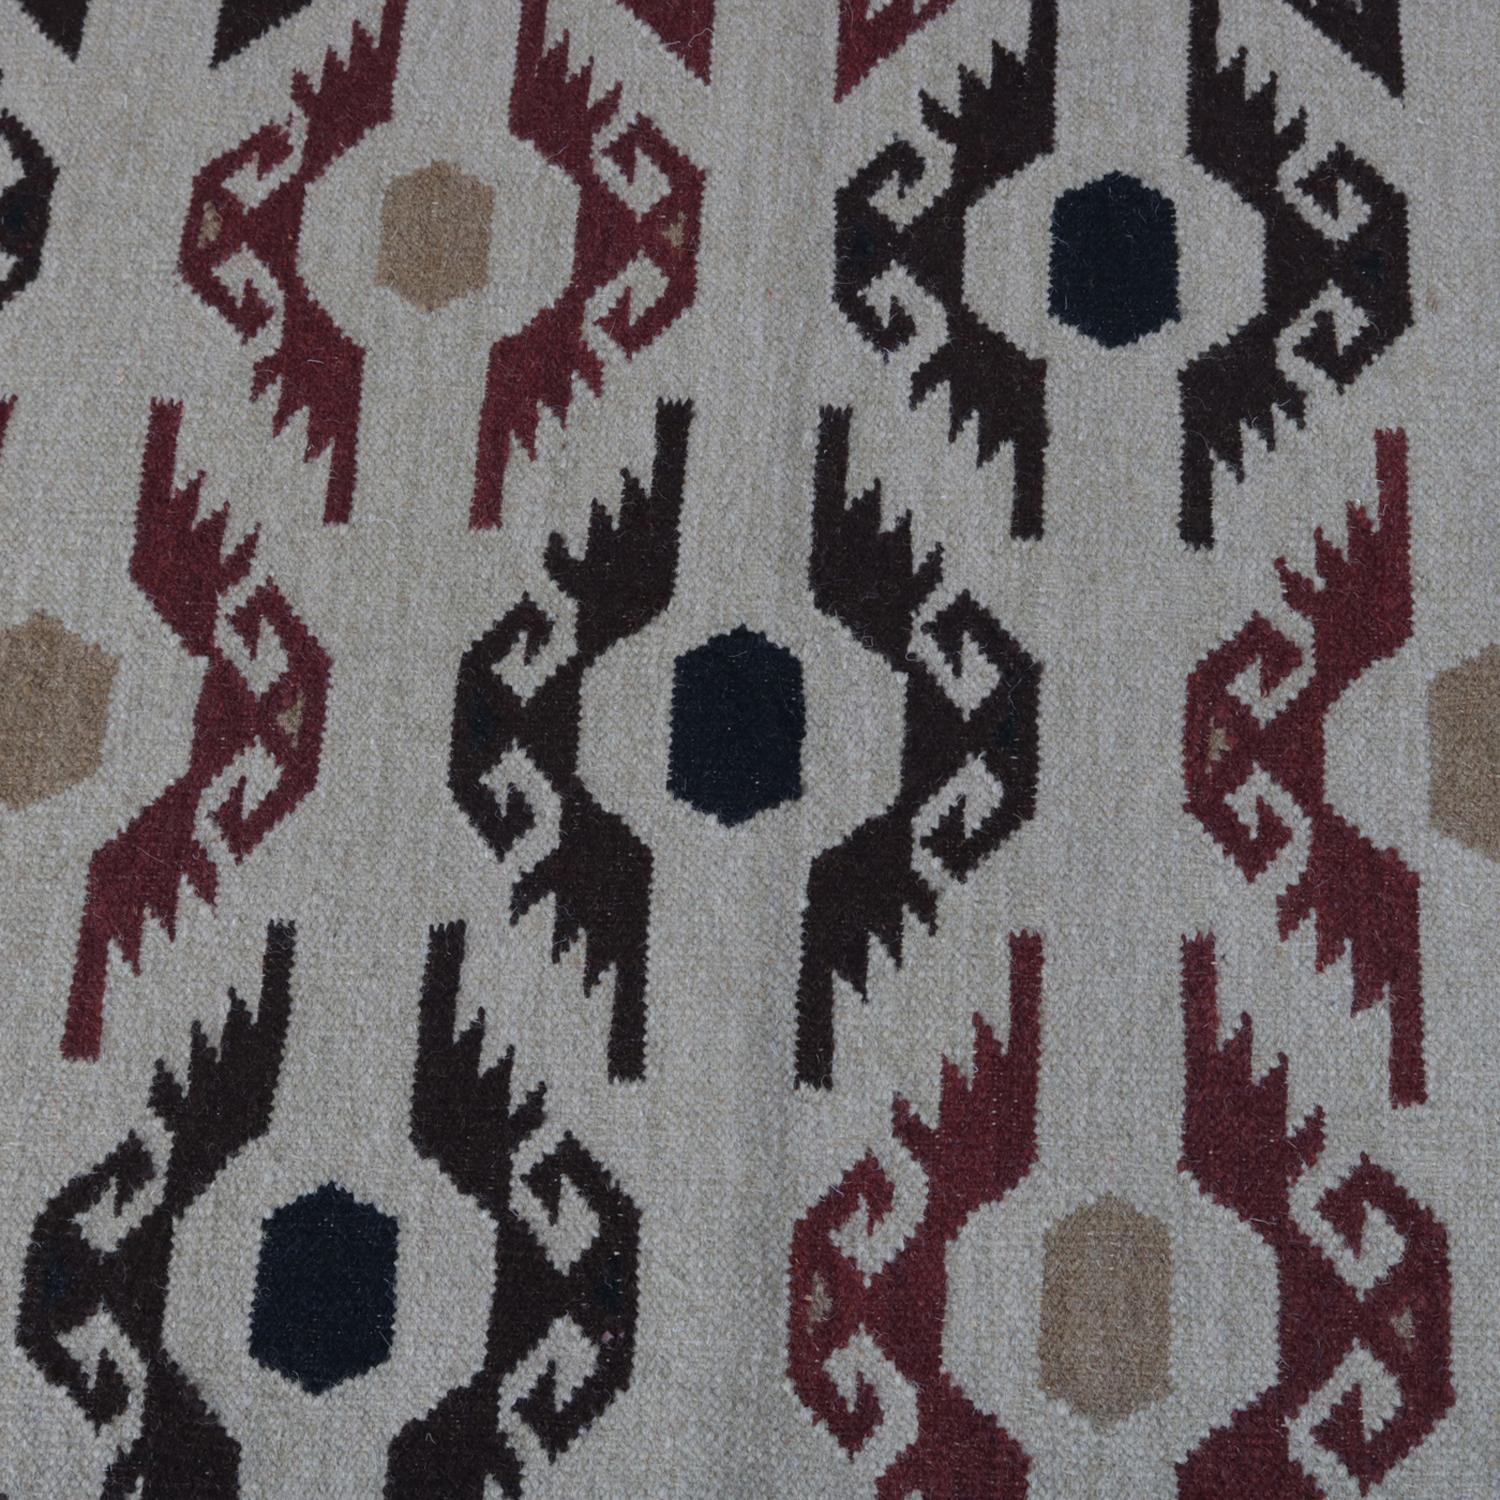 A Native American Indian Navajo style area rug features repeating central geometric design of stylized eagles in beige, maroon red, deep brown, yellow, black and tan, 20th century.

***DELIVERY NOTICE – Due to COVID-19 we are employing NO-CONTACT